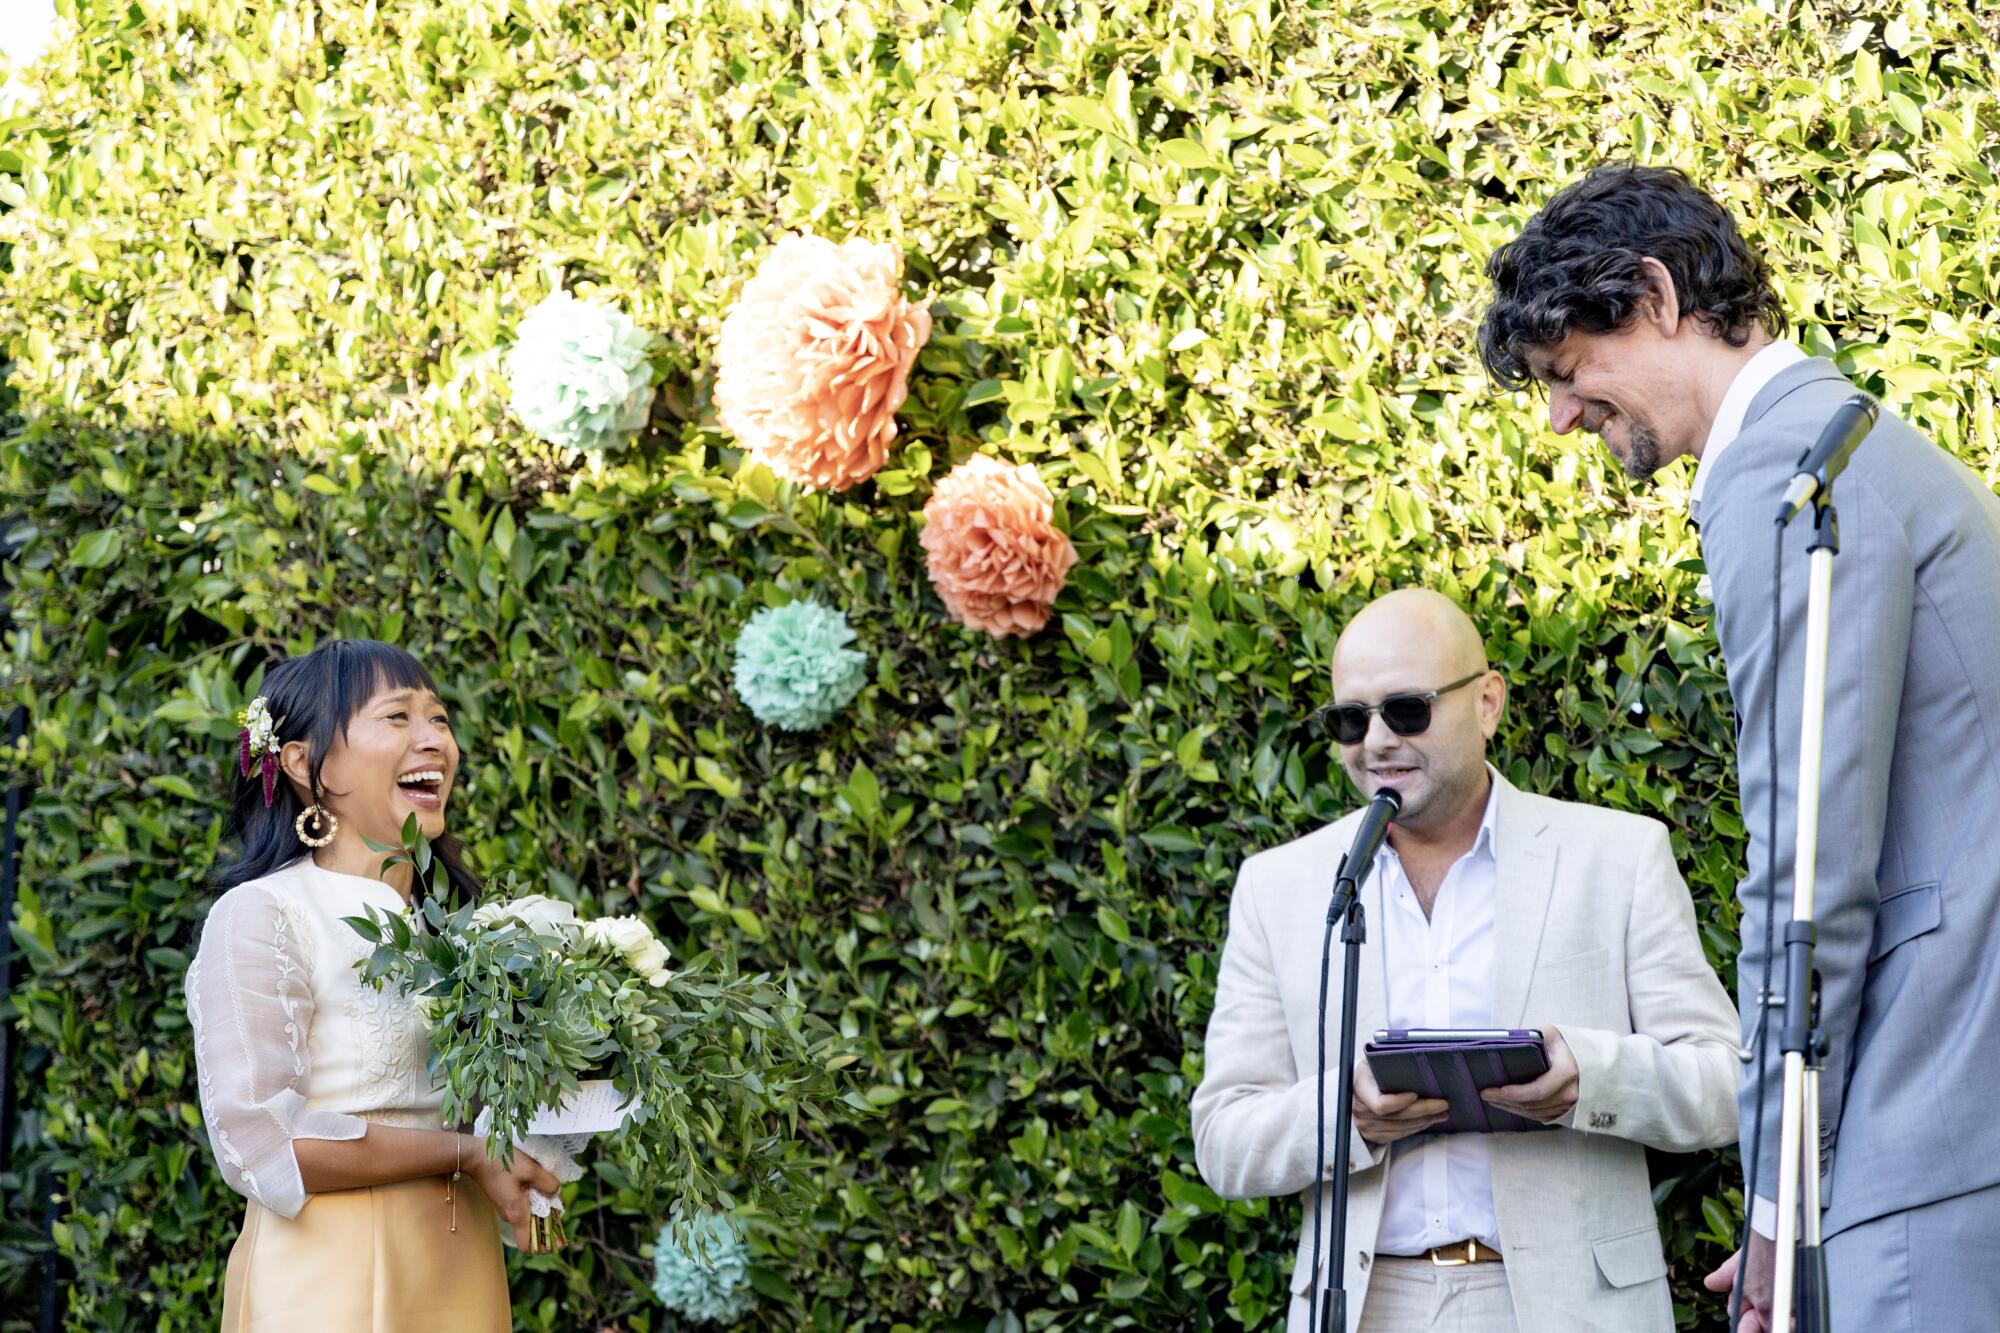 A laughing woman, a bald man in dark glasses and a tall man in a gray suit next to microphones in front of a hedge